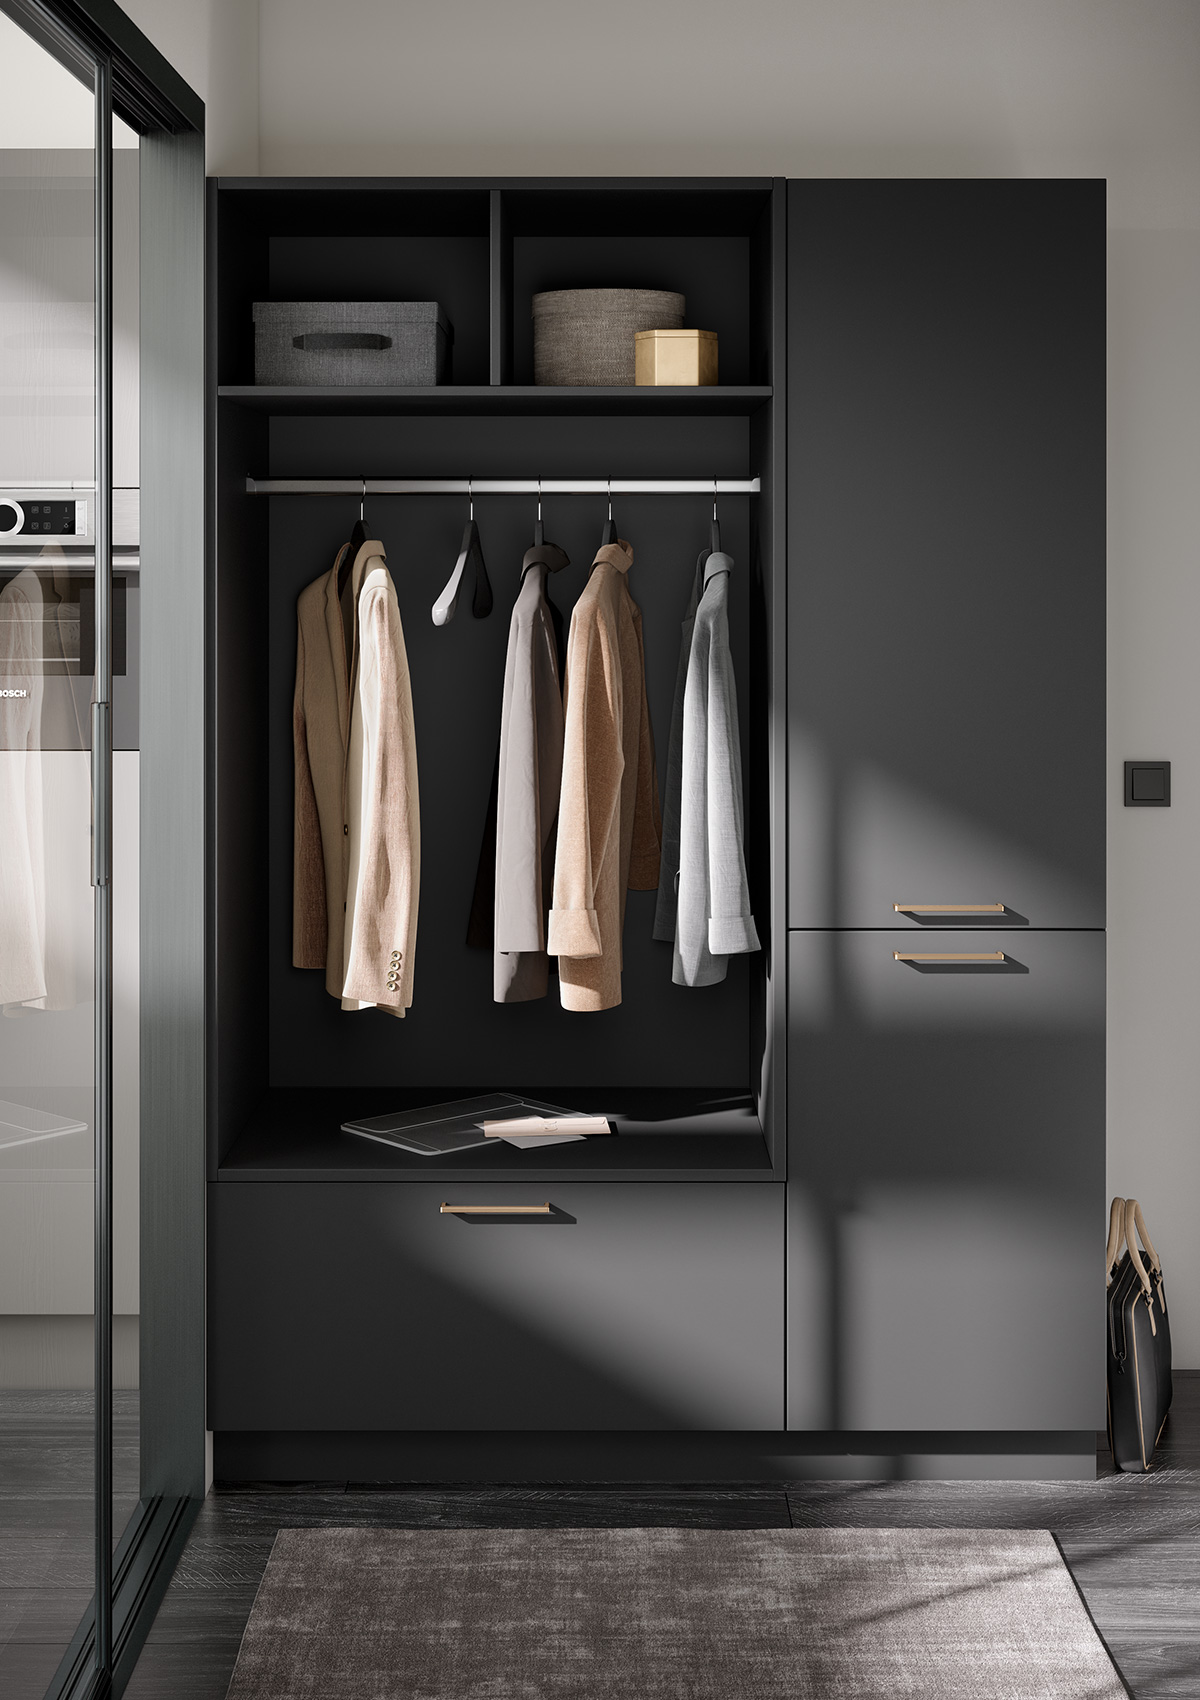 Illustration of the wardrobe in Uno Graphite with bronze-coloured handles